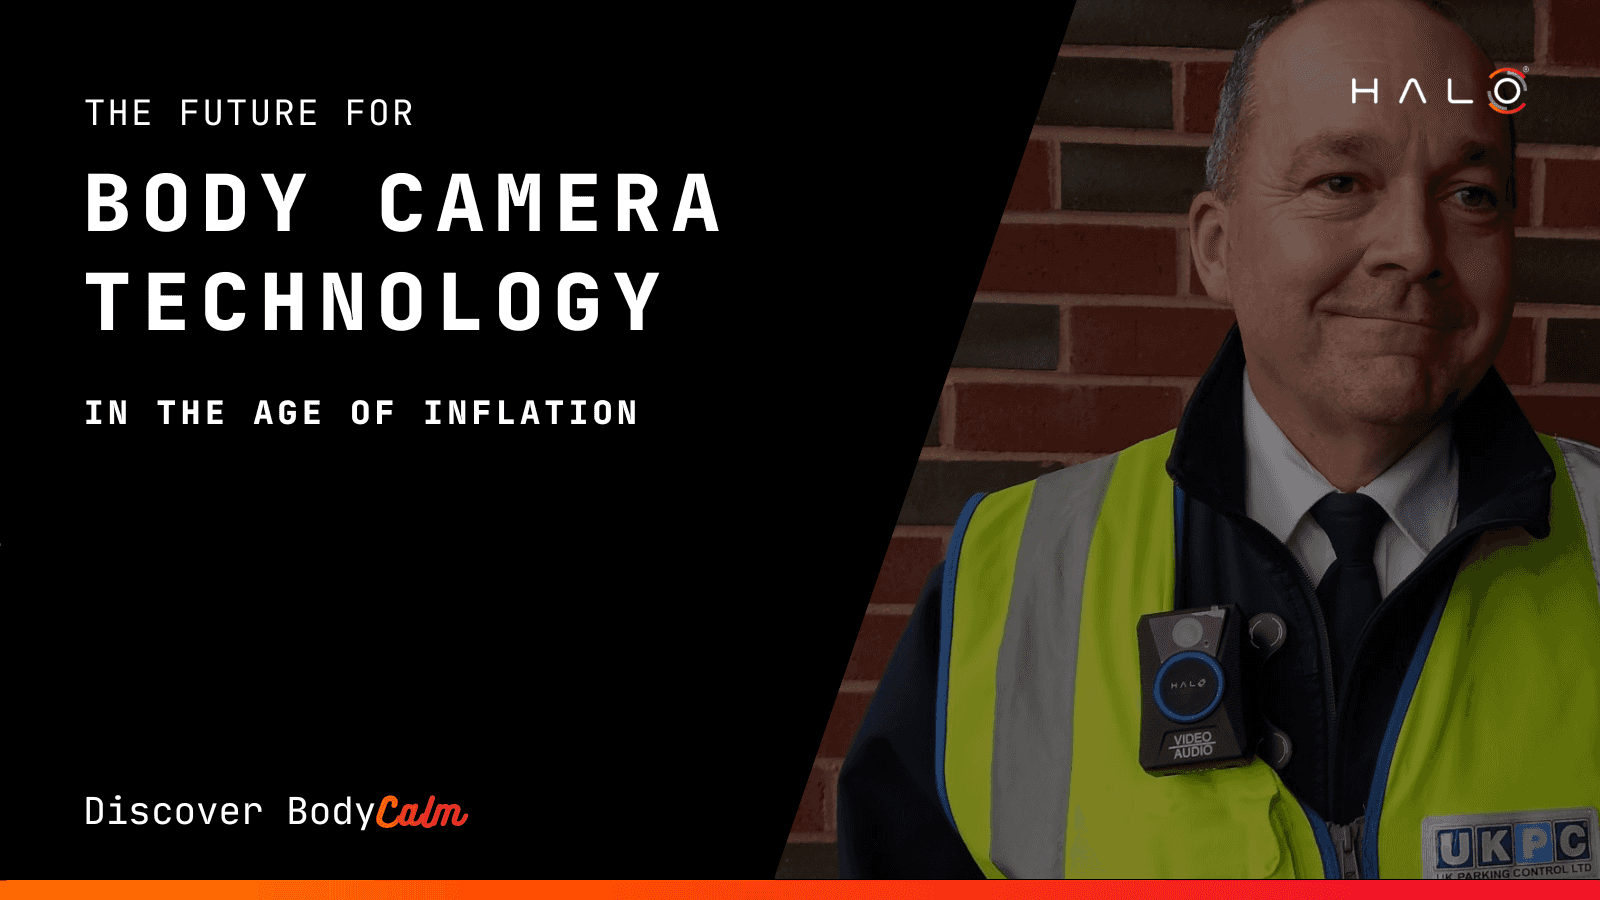 THE  FUTURE OF BODY CAMERA TECHNOLOGY IN THE AGE OF INFLATION